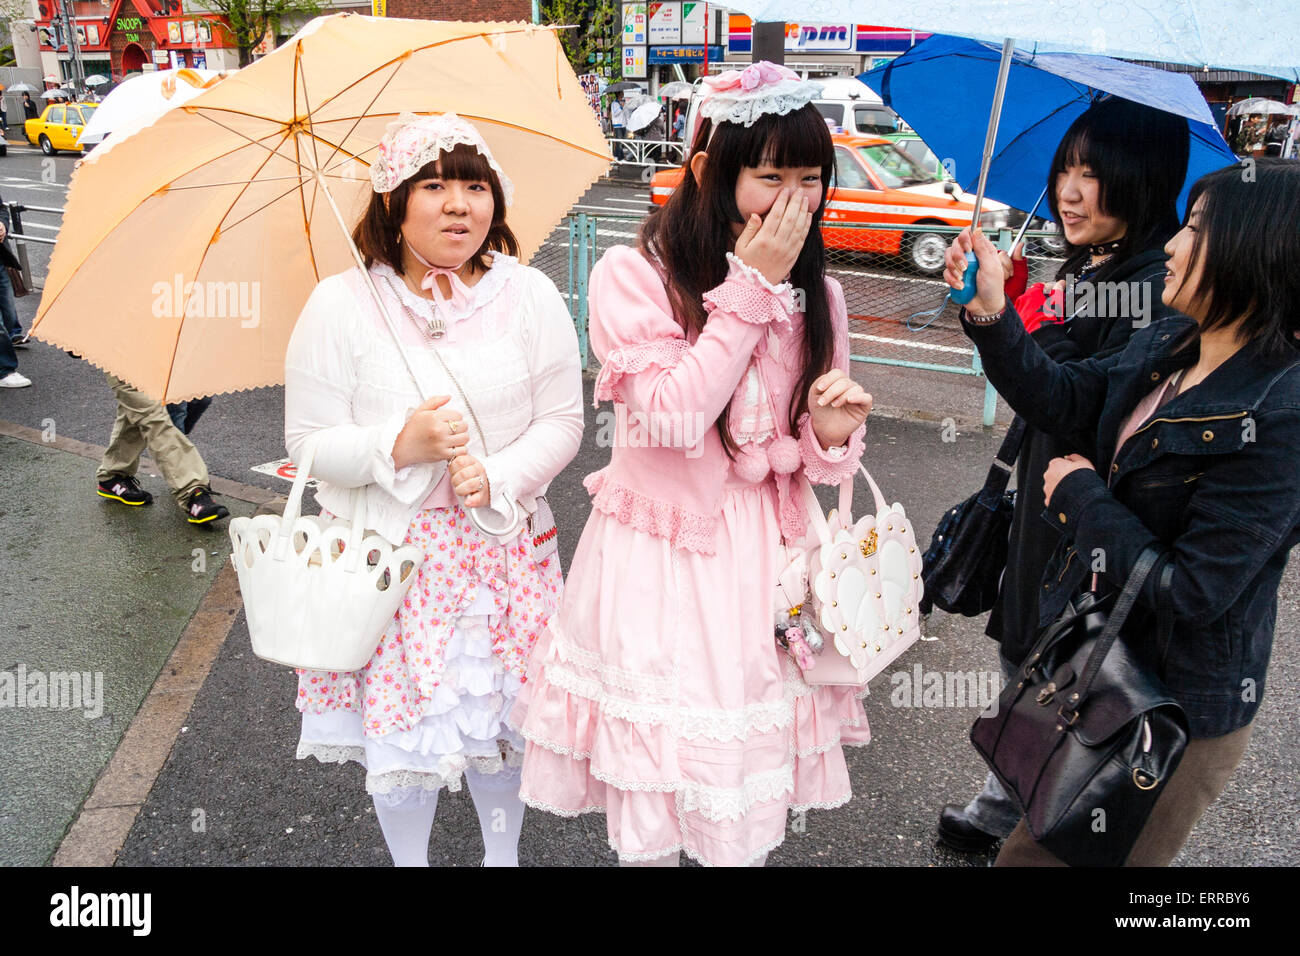 Tokyo, Harajuku. Cosplay. Two Japanese women in Goth 'Sweet Lolita' clothing, taking to two other young women in black goth clothing. Raining. Stock Photo